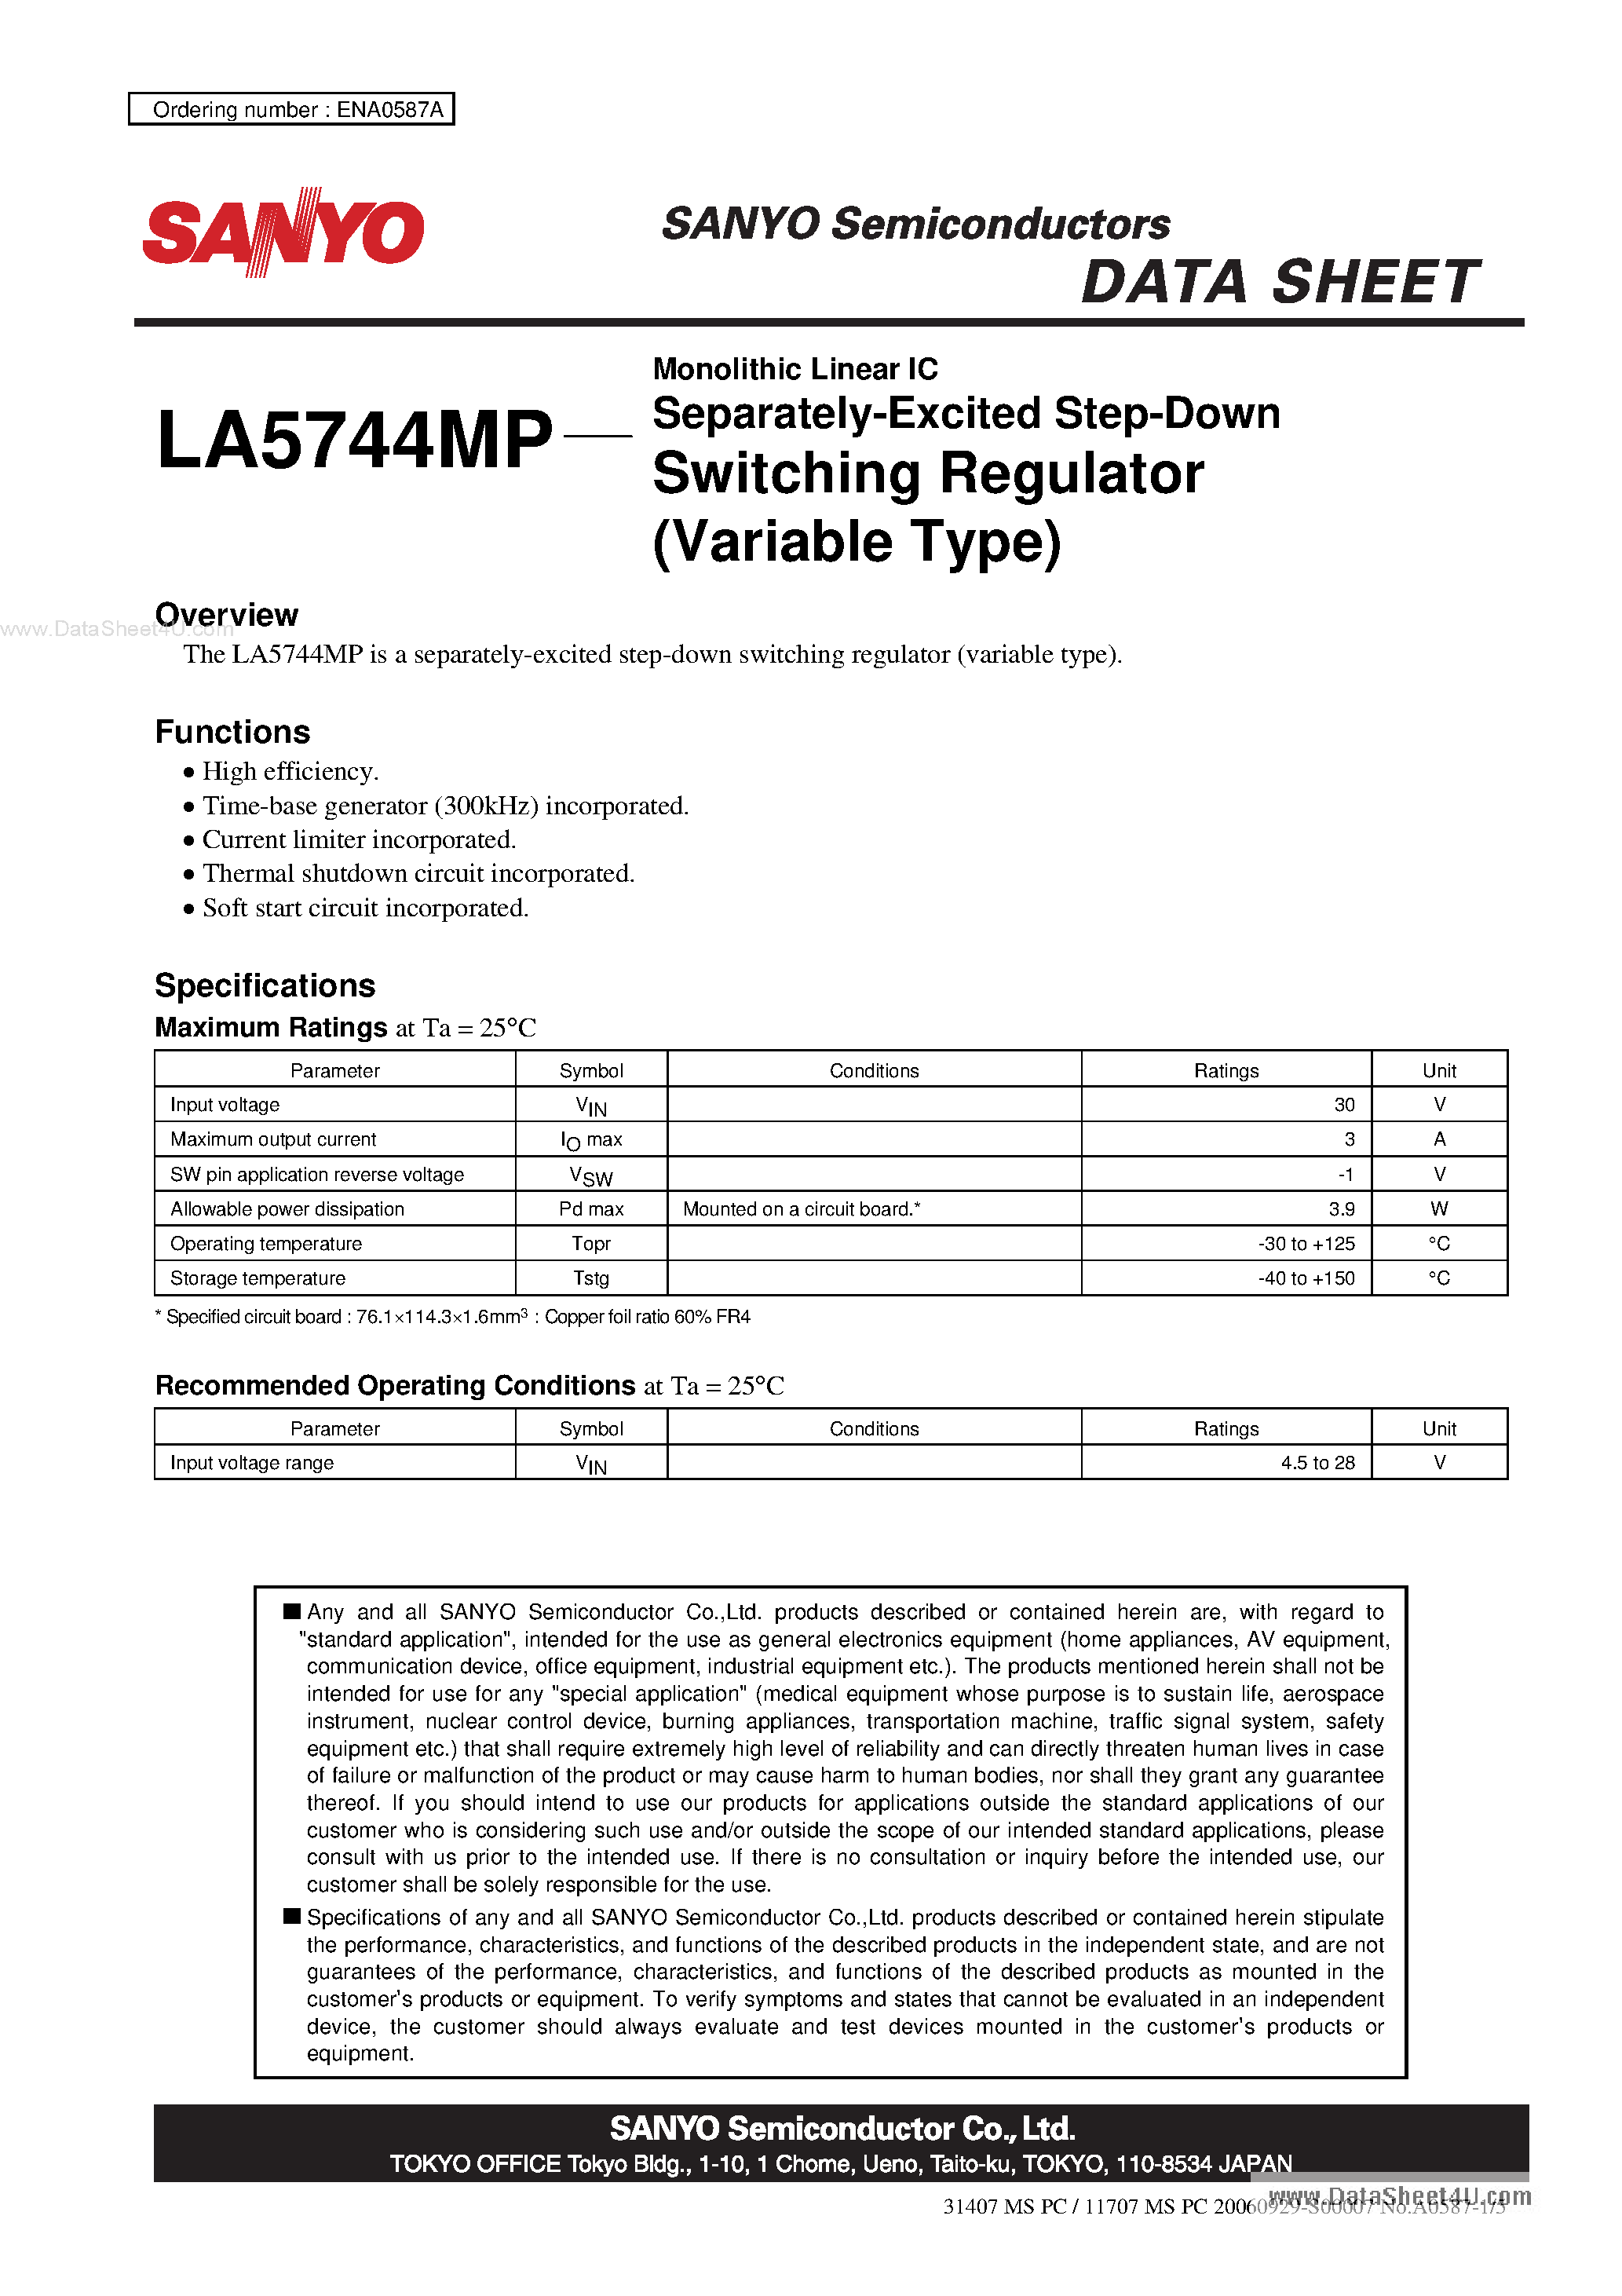 Даташит LA5744MP-Monolithic Linear IC Separately-Excited Step-Down Switching Regulator страница 1